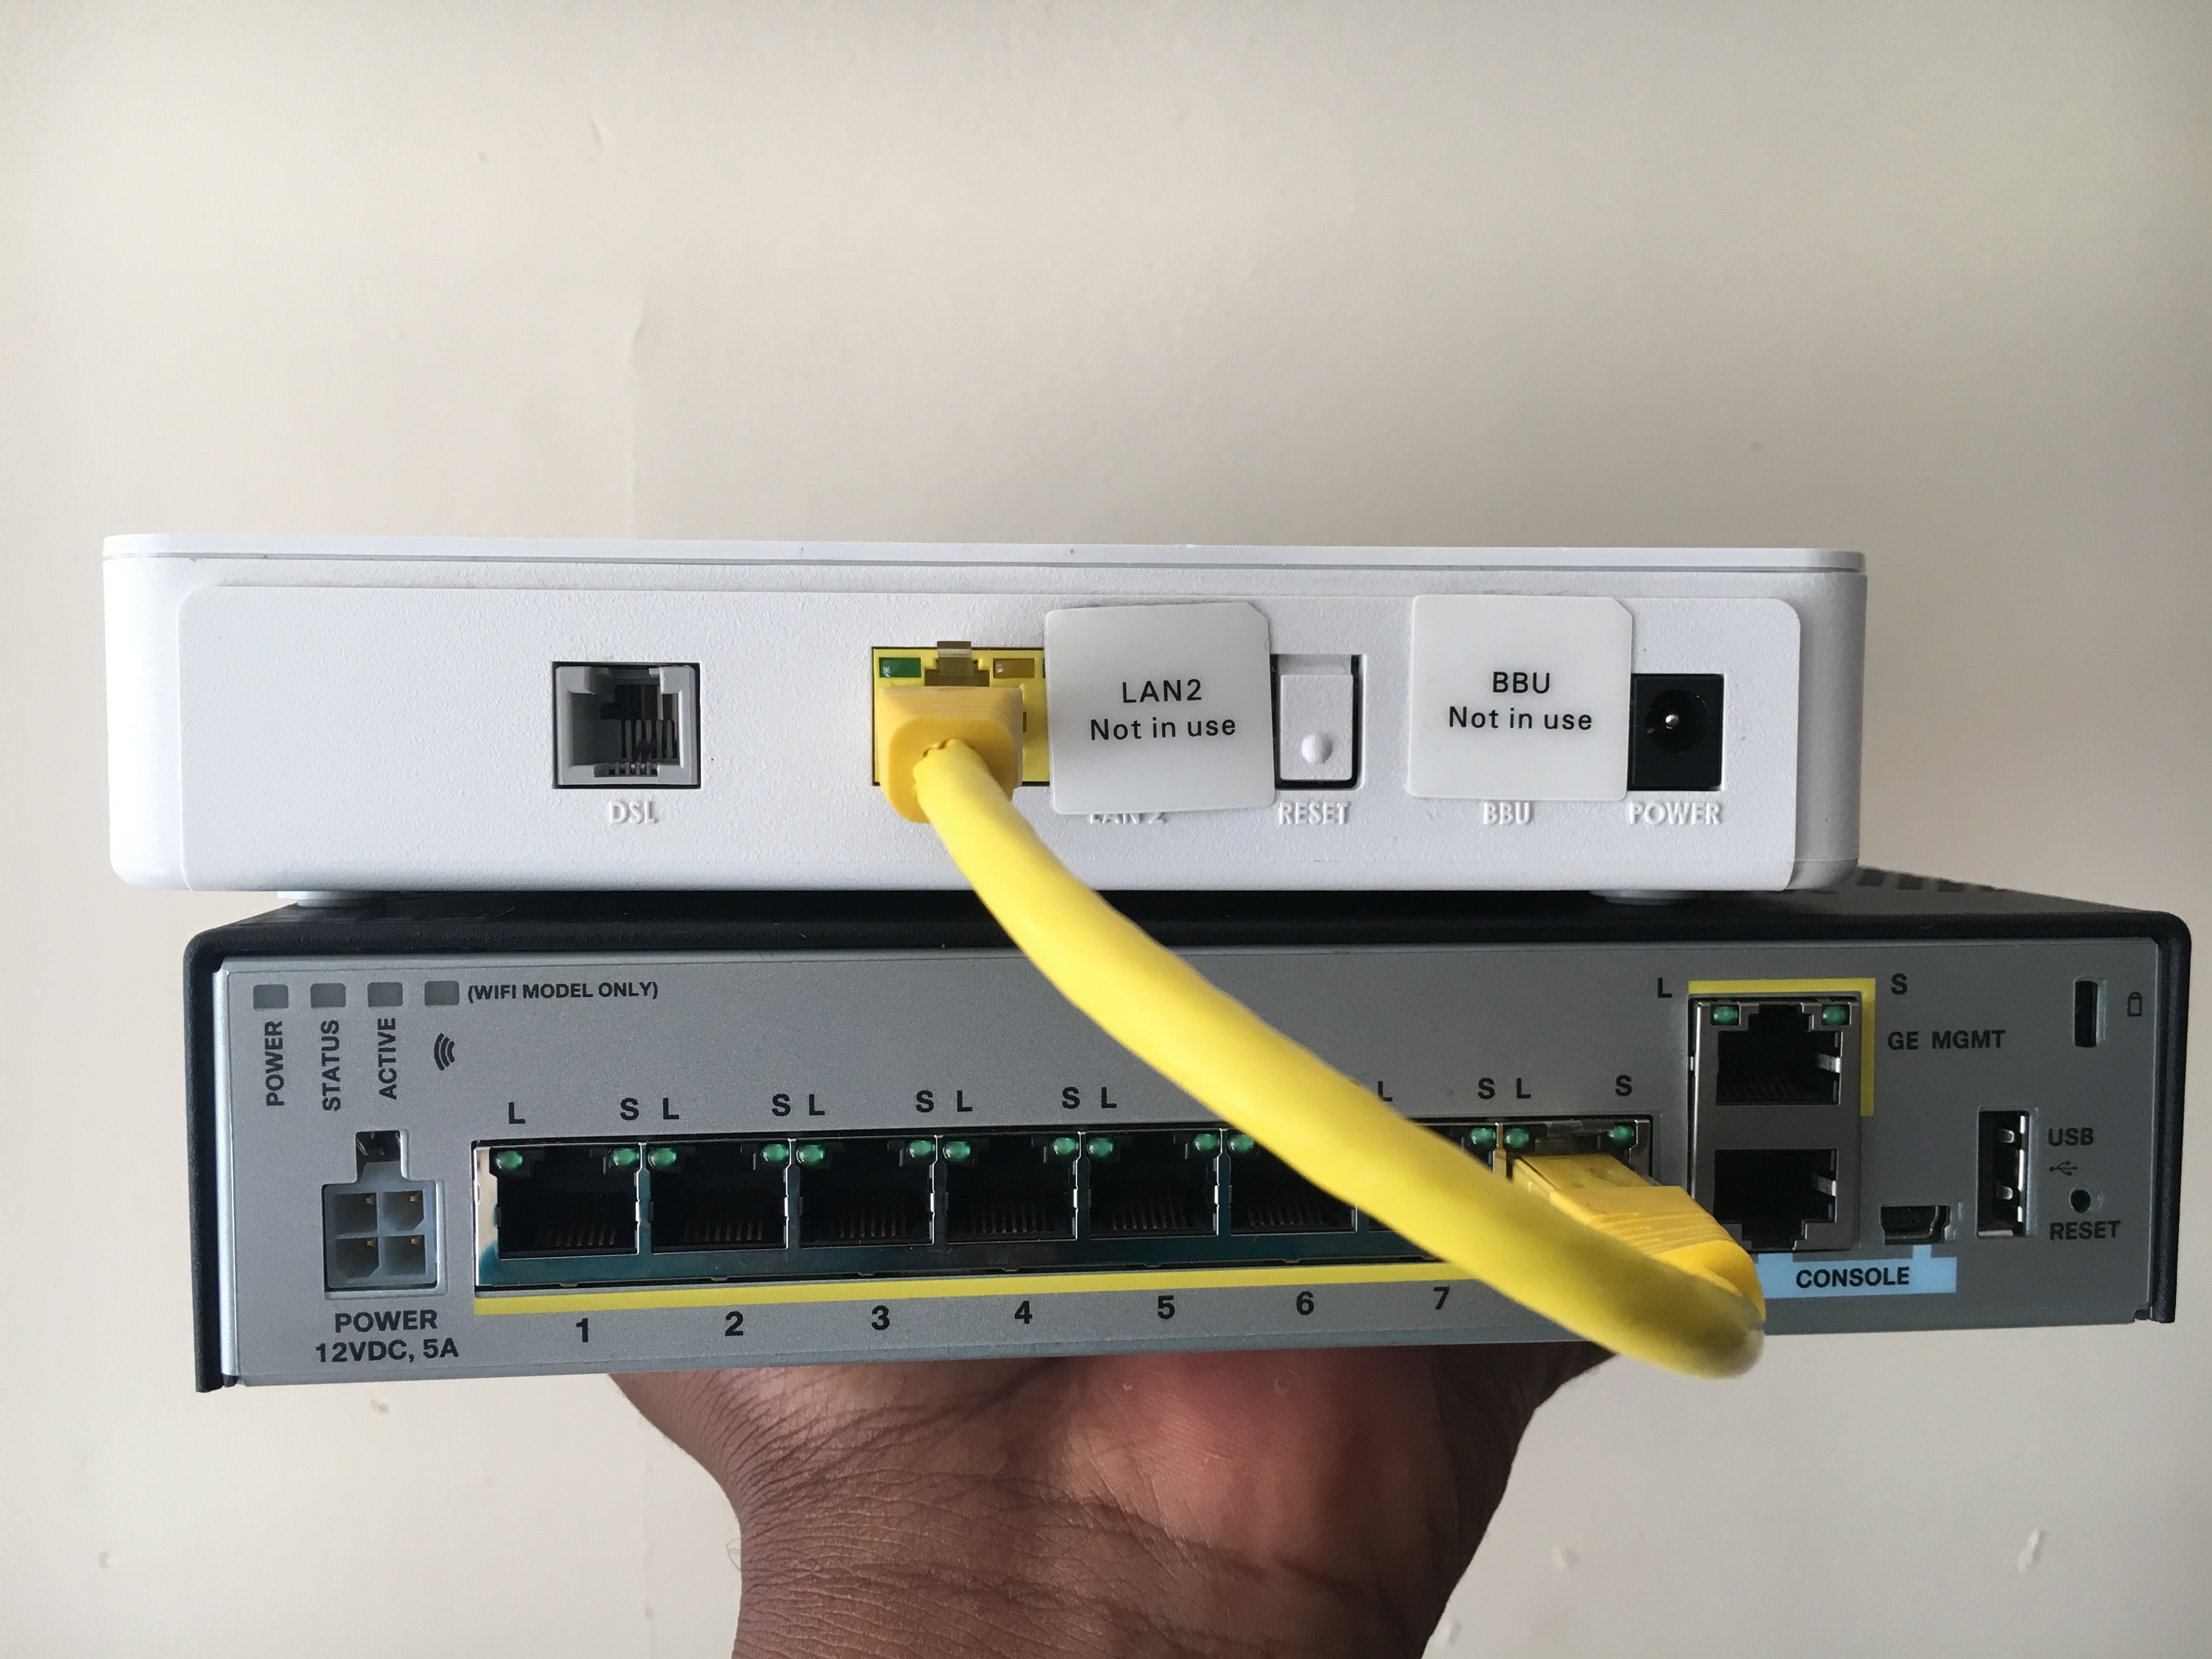 How to configure Cisco ASA 5506-X for PPPoE - Expert Network Consultant